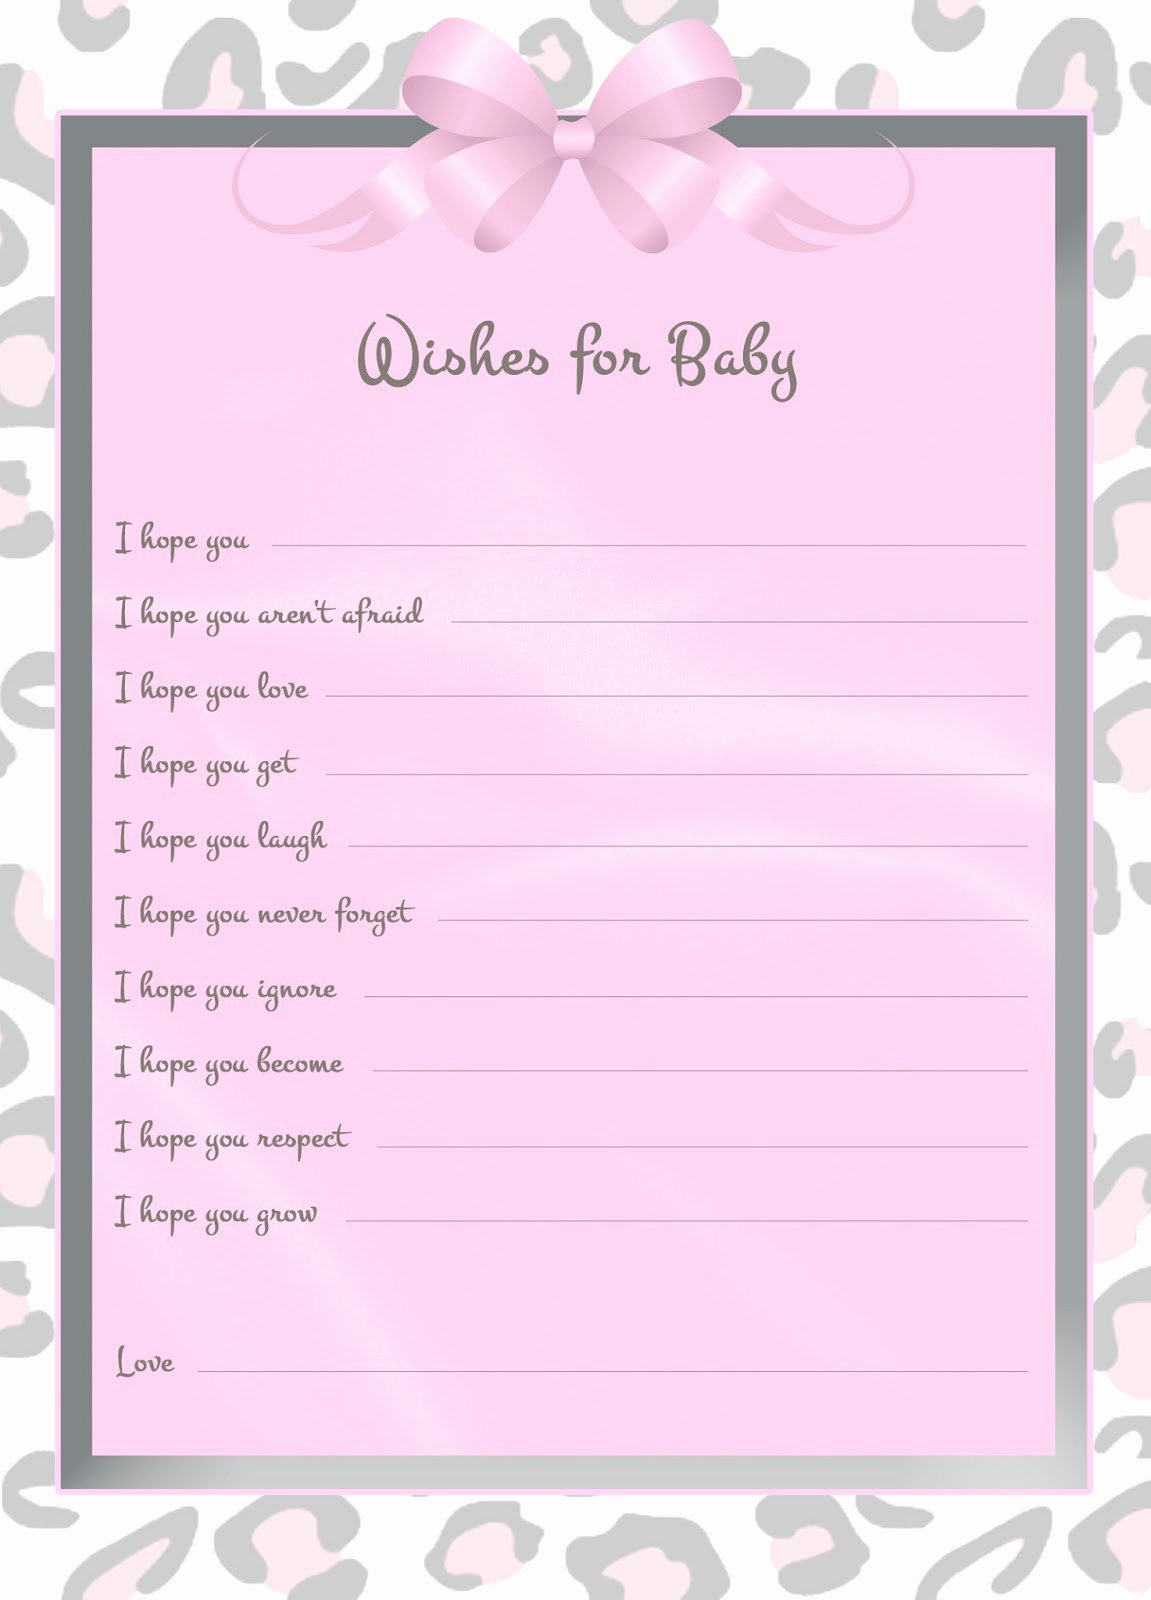 Wishes for Baby Template Lovely Free the Diva Freebies